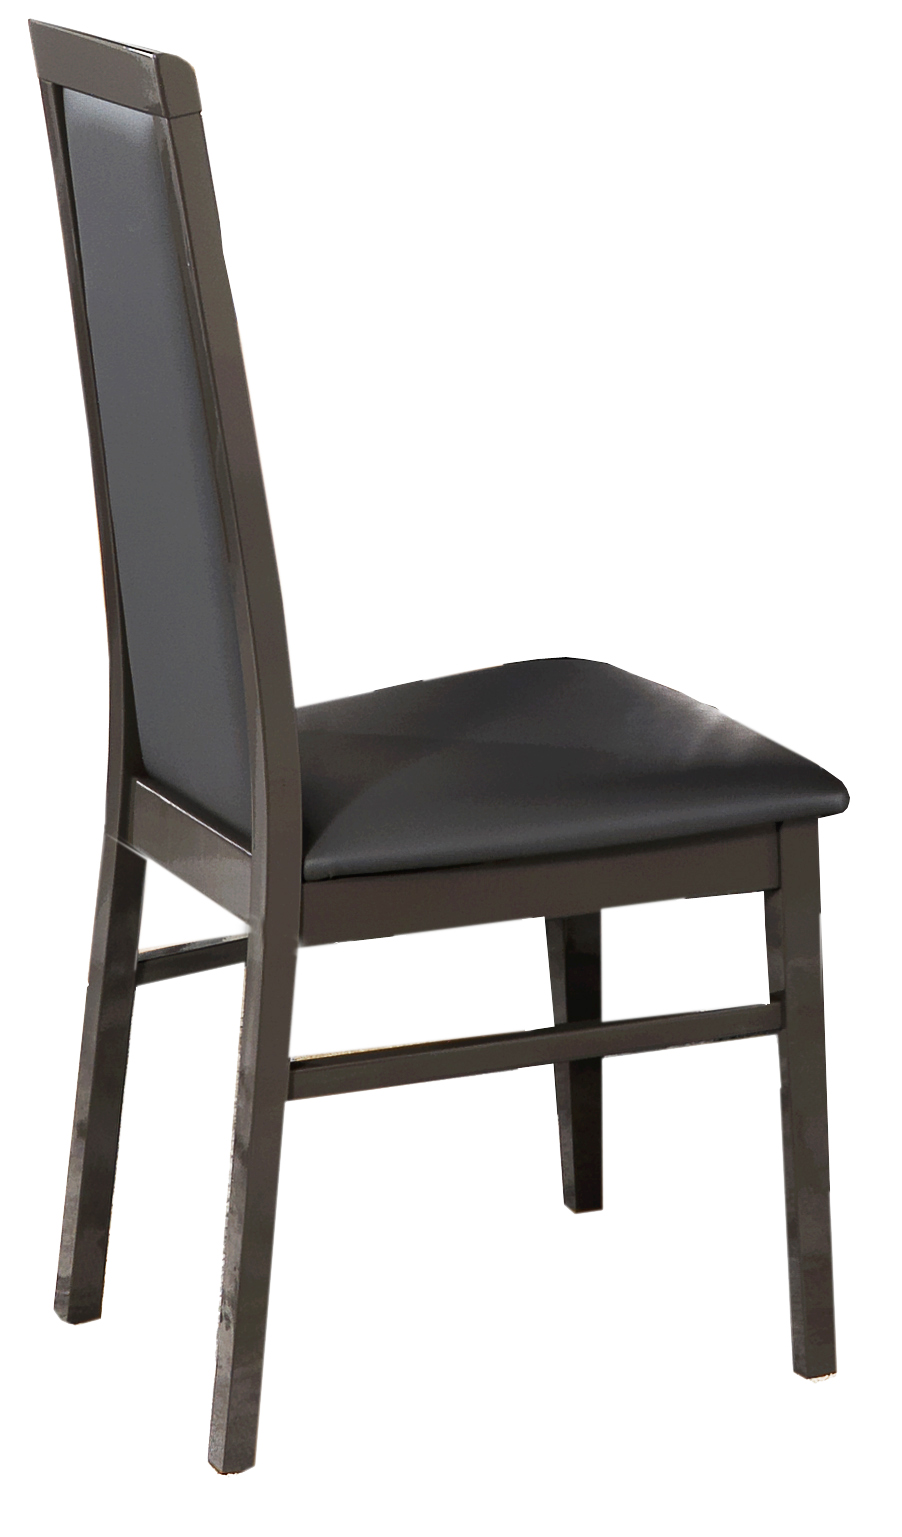 Brands MCS Classic Dinings, Italy Oxford Dining Chair